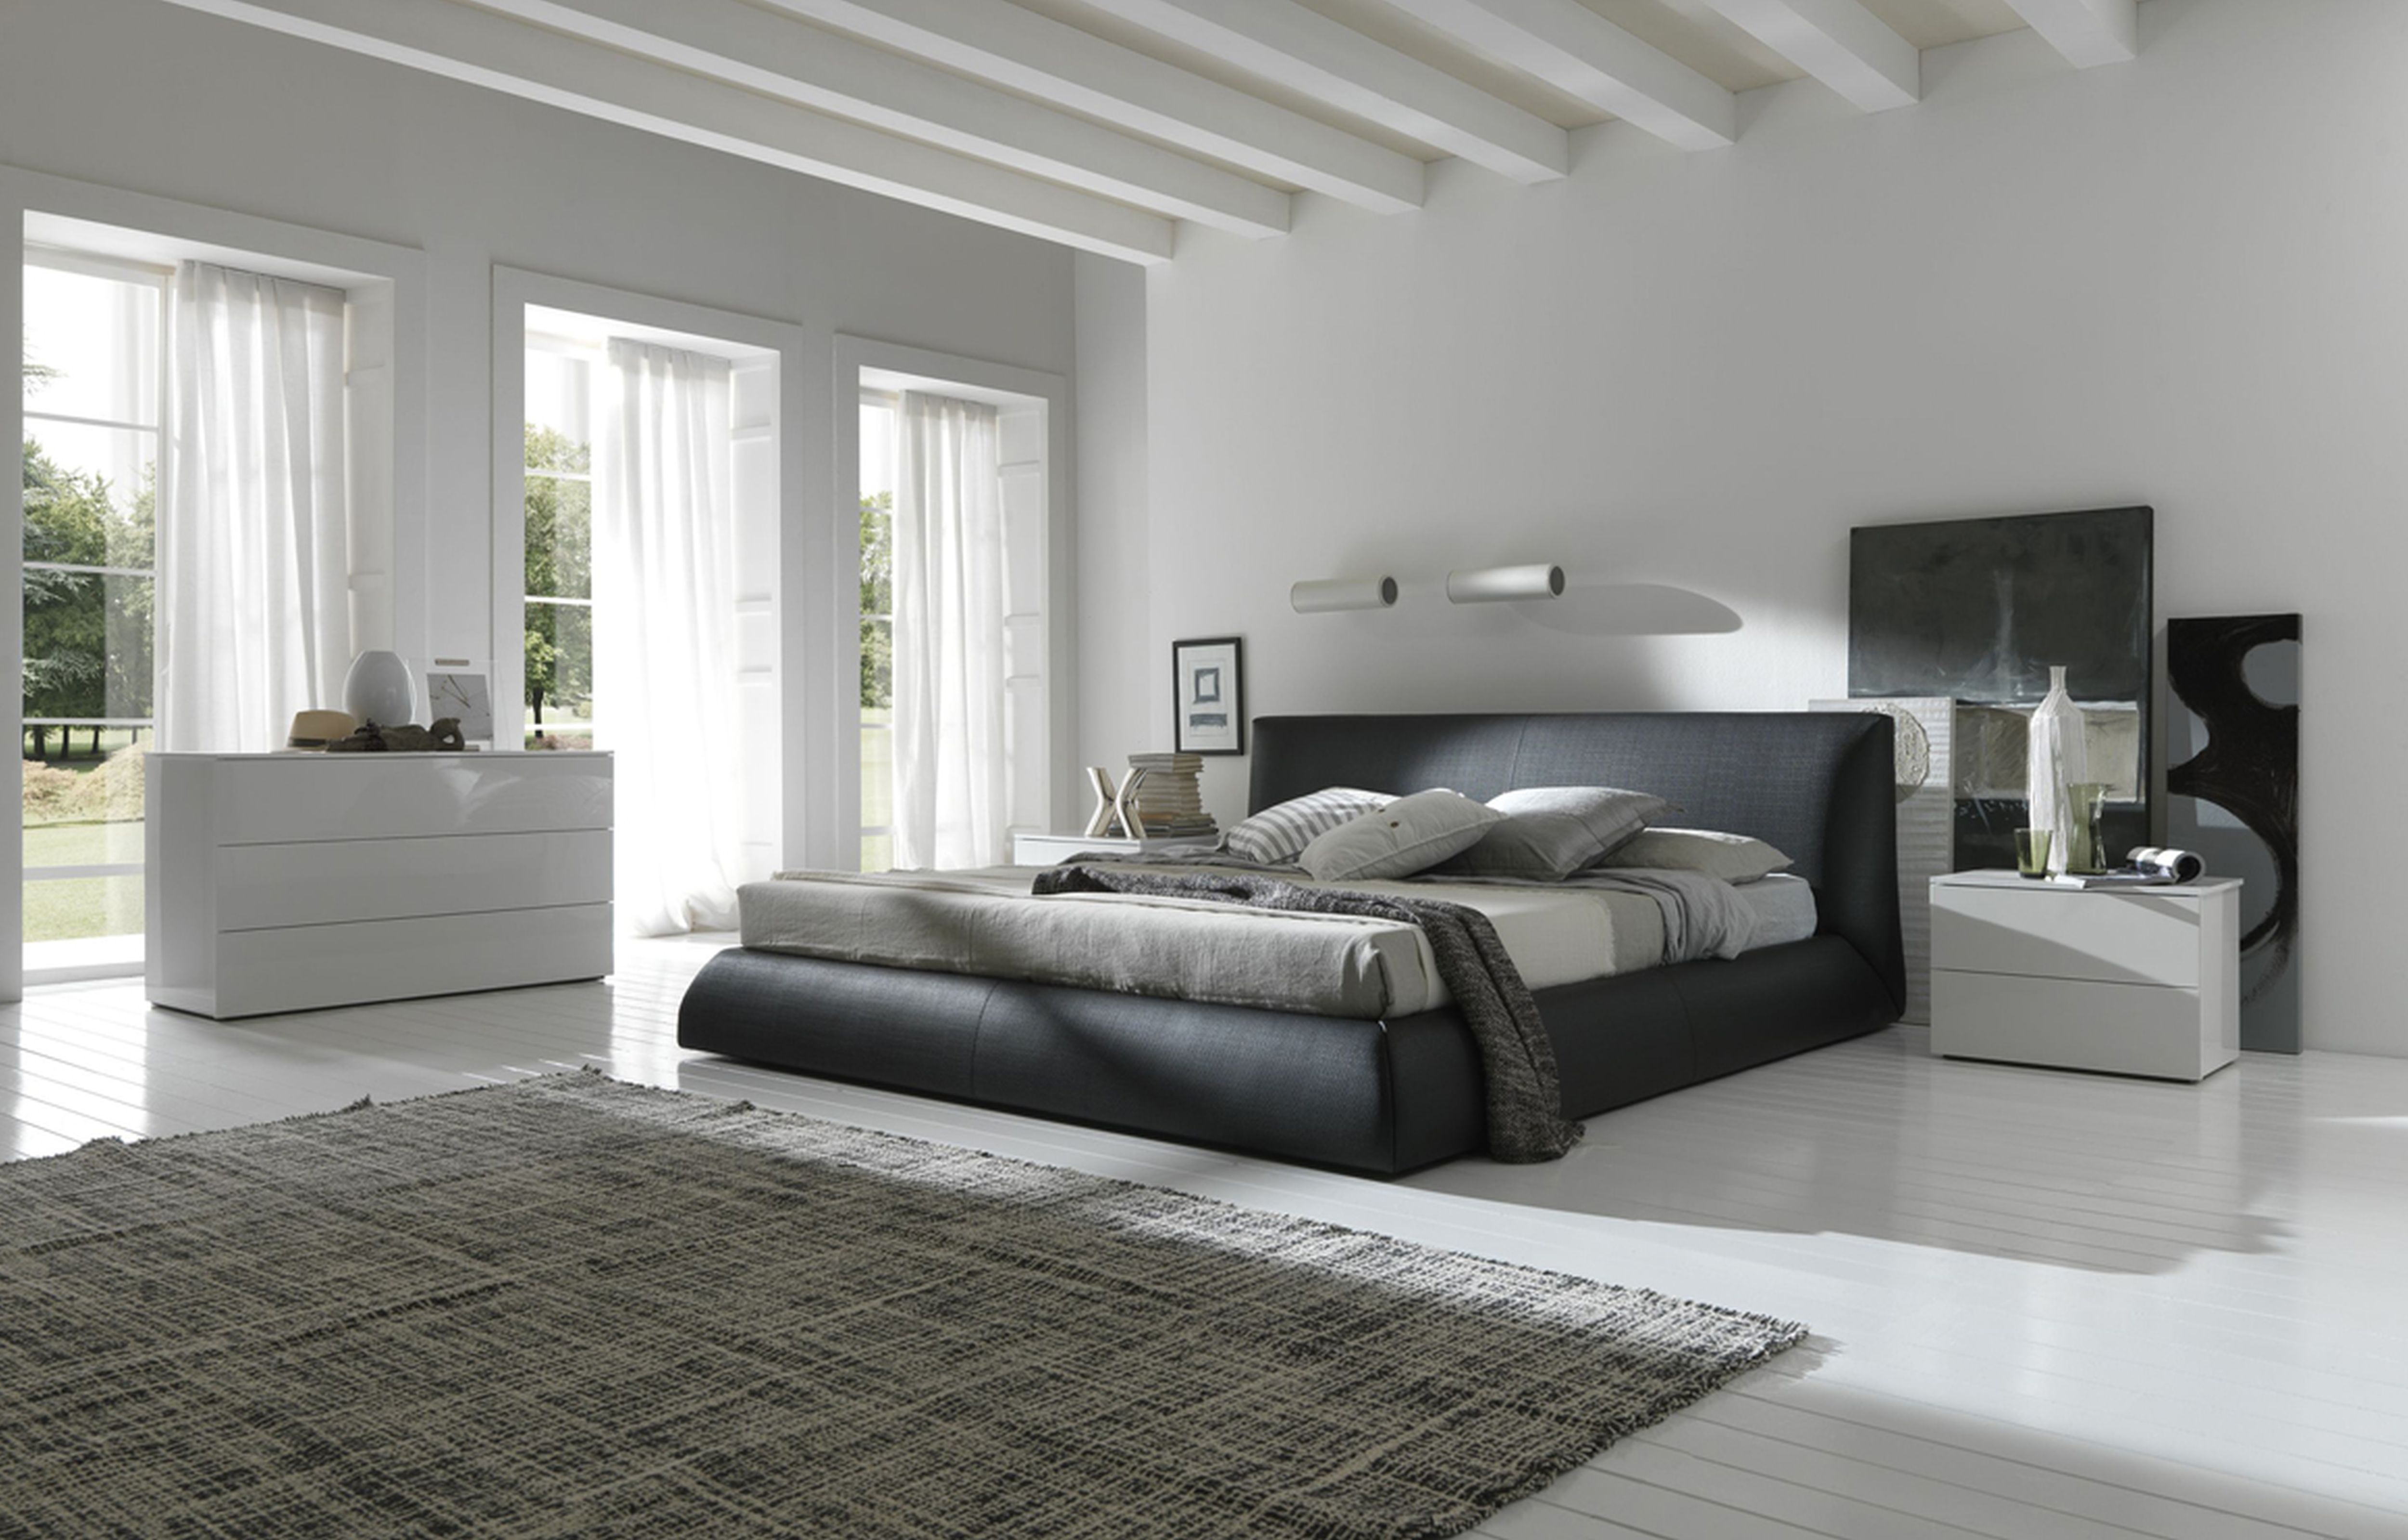 40 Modern Bedroom For Your Home